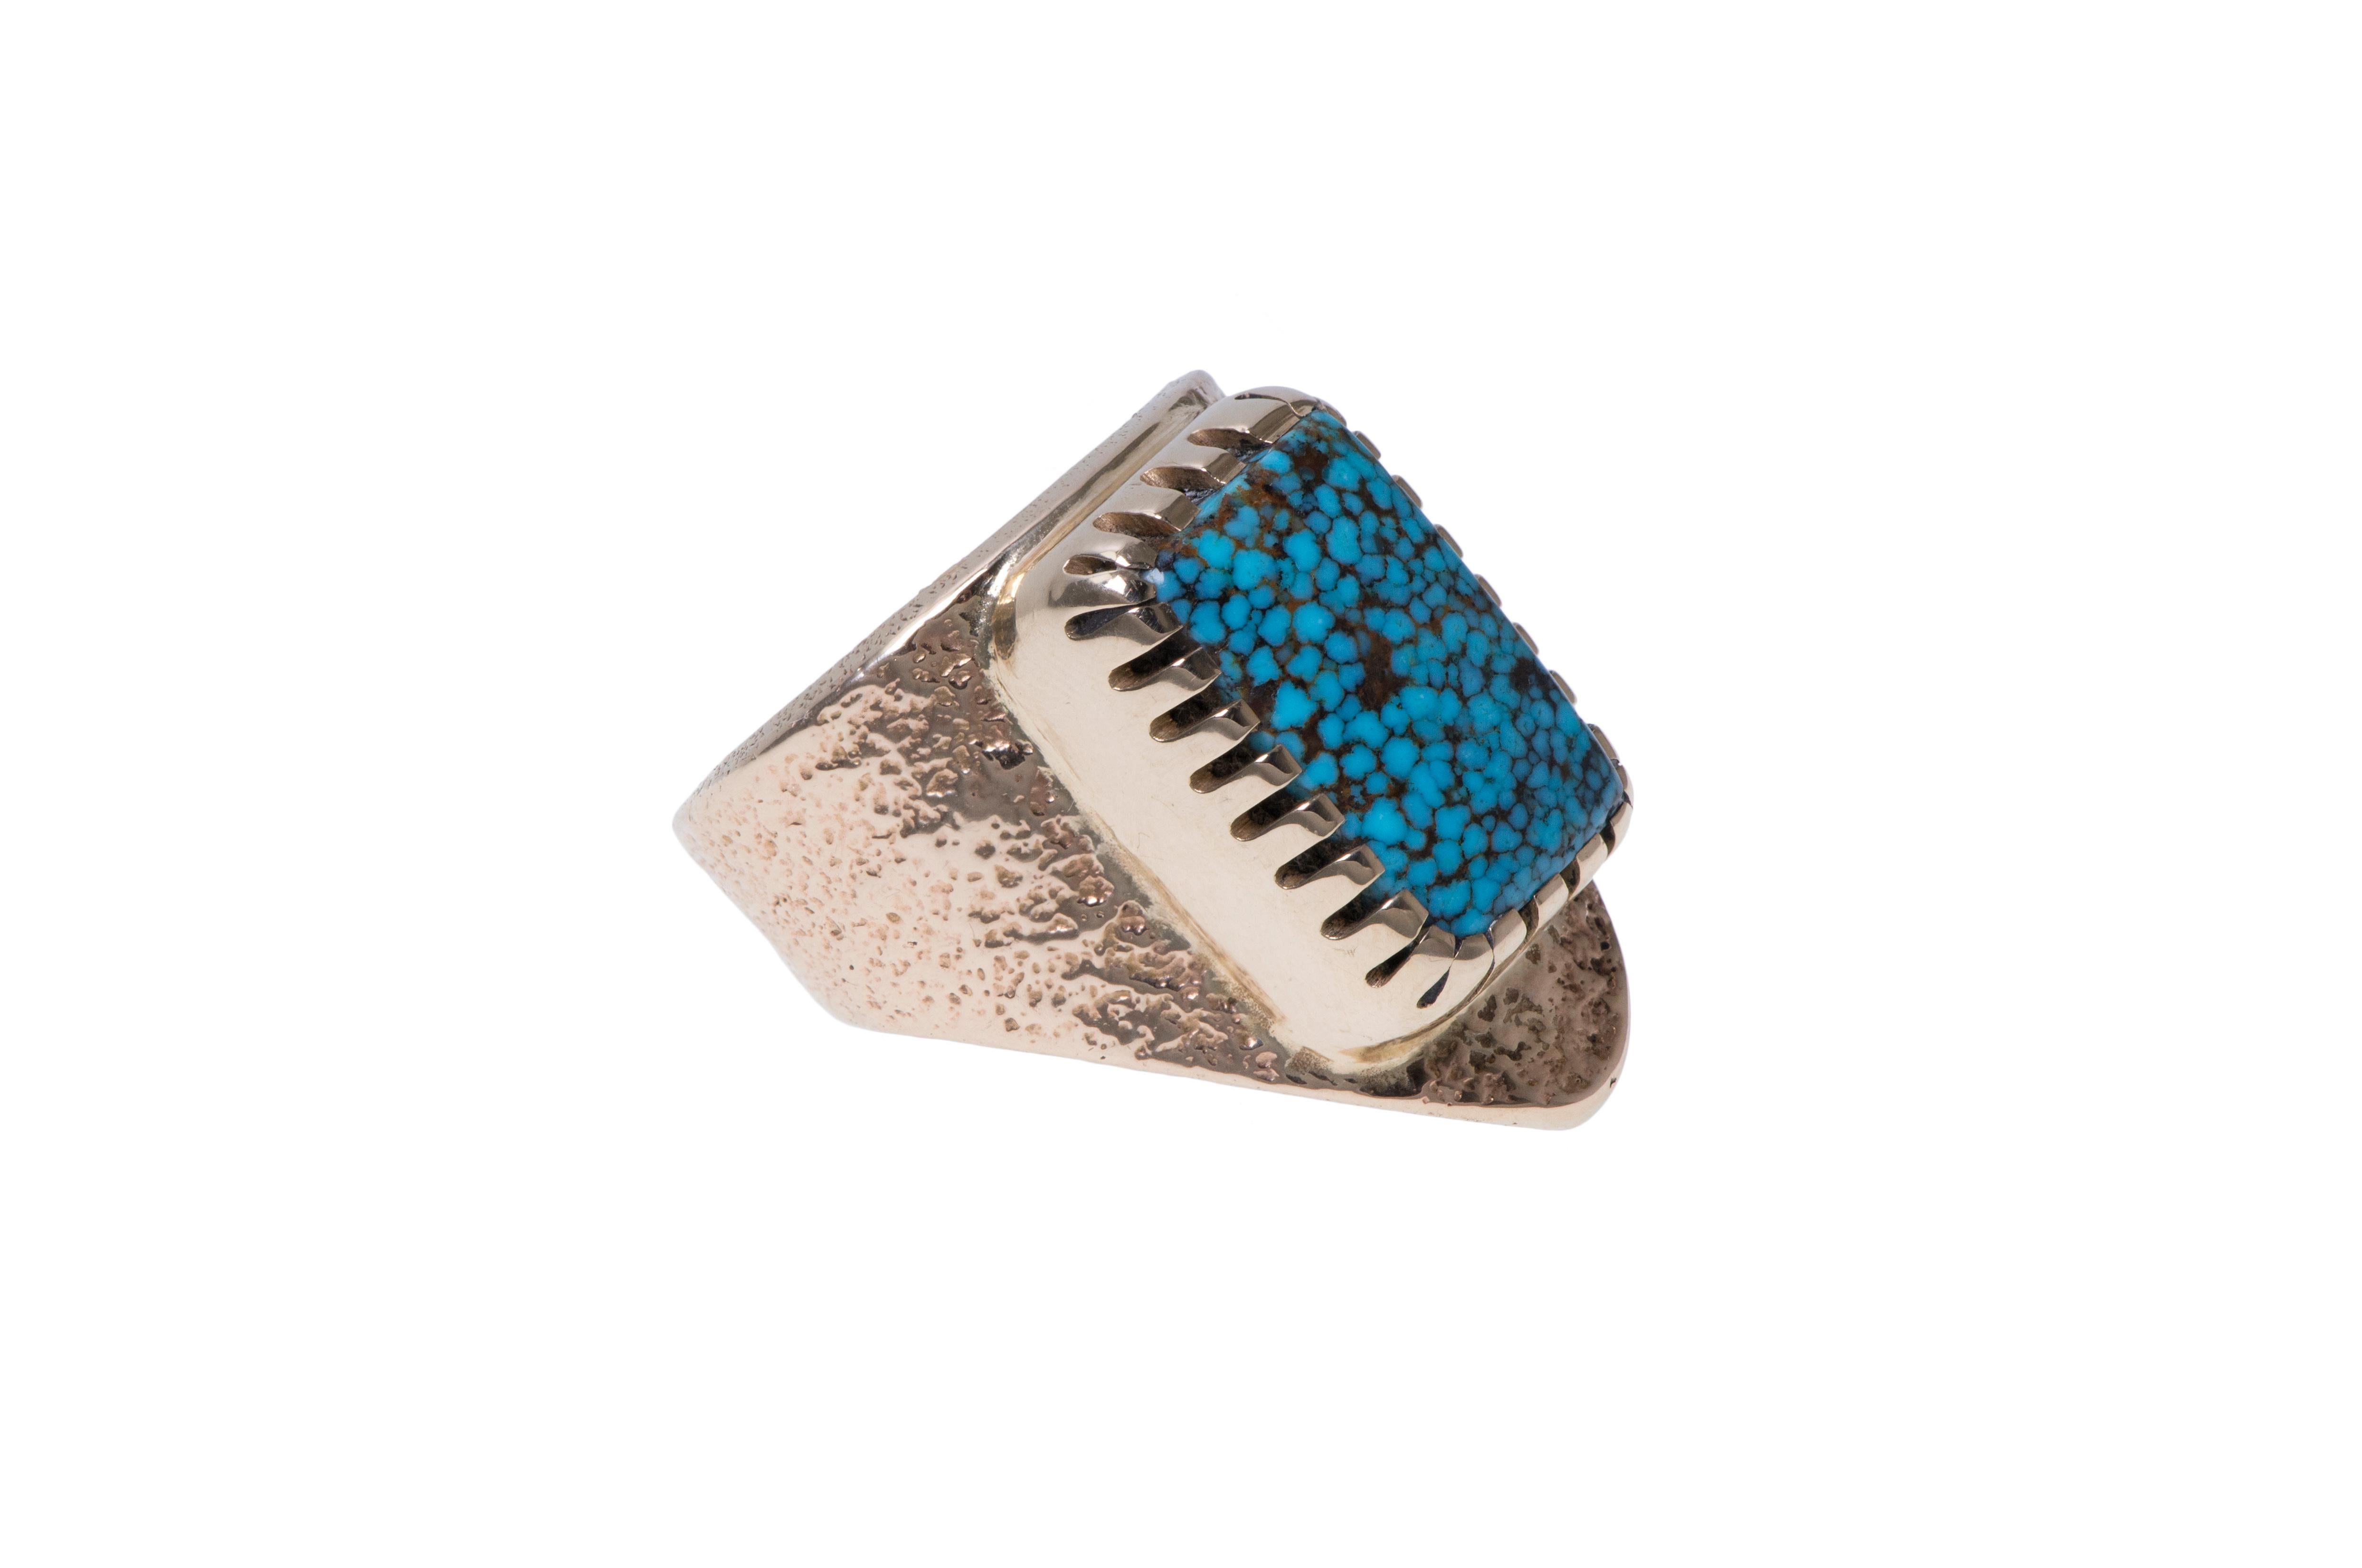 An authentic,  one-of-a-kind, finely crafted, and highly collectible, Nevada Blue turquoise and tufa cast 14 karat gold ring, with interior exposed turquoise, by Hopi modernist master Charles Loloma, c. 1975. 

The ring is a size 7.75 and is stamped